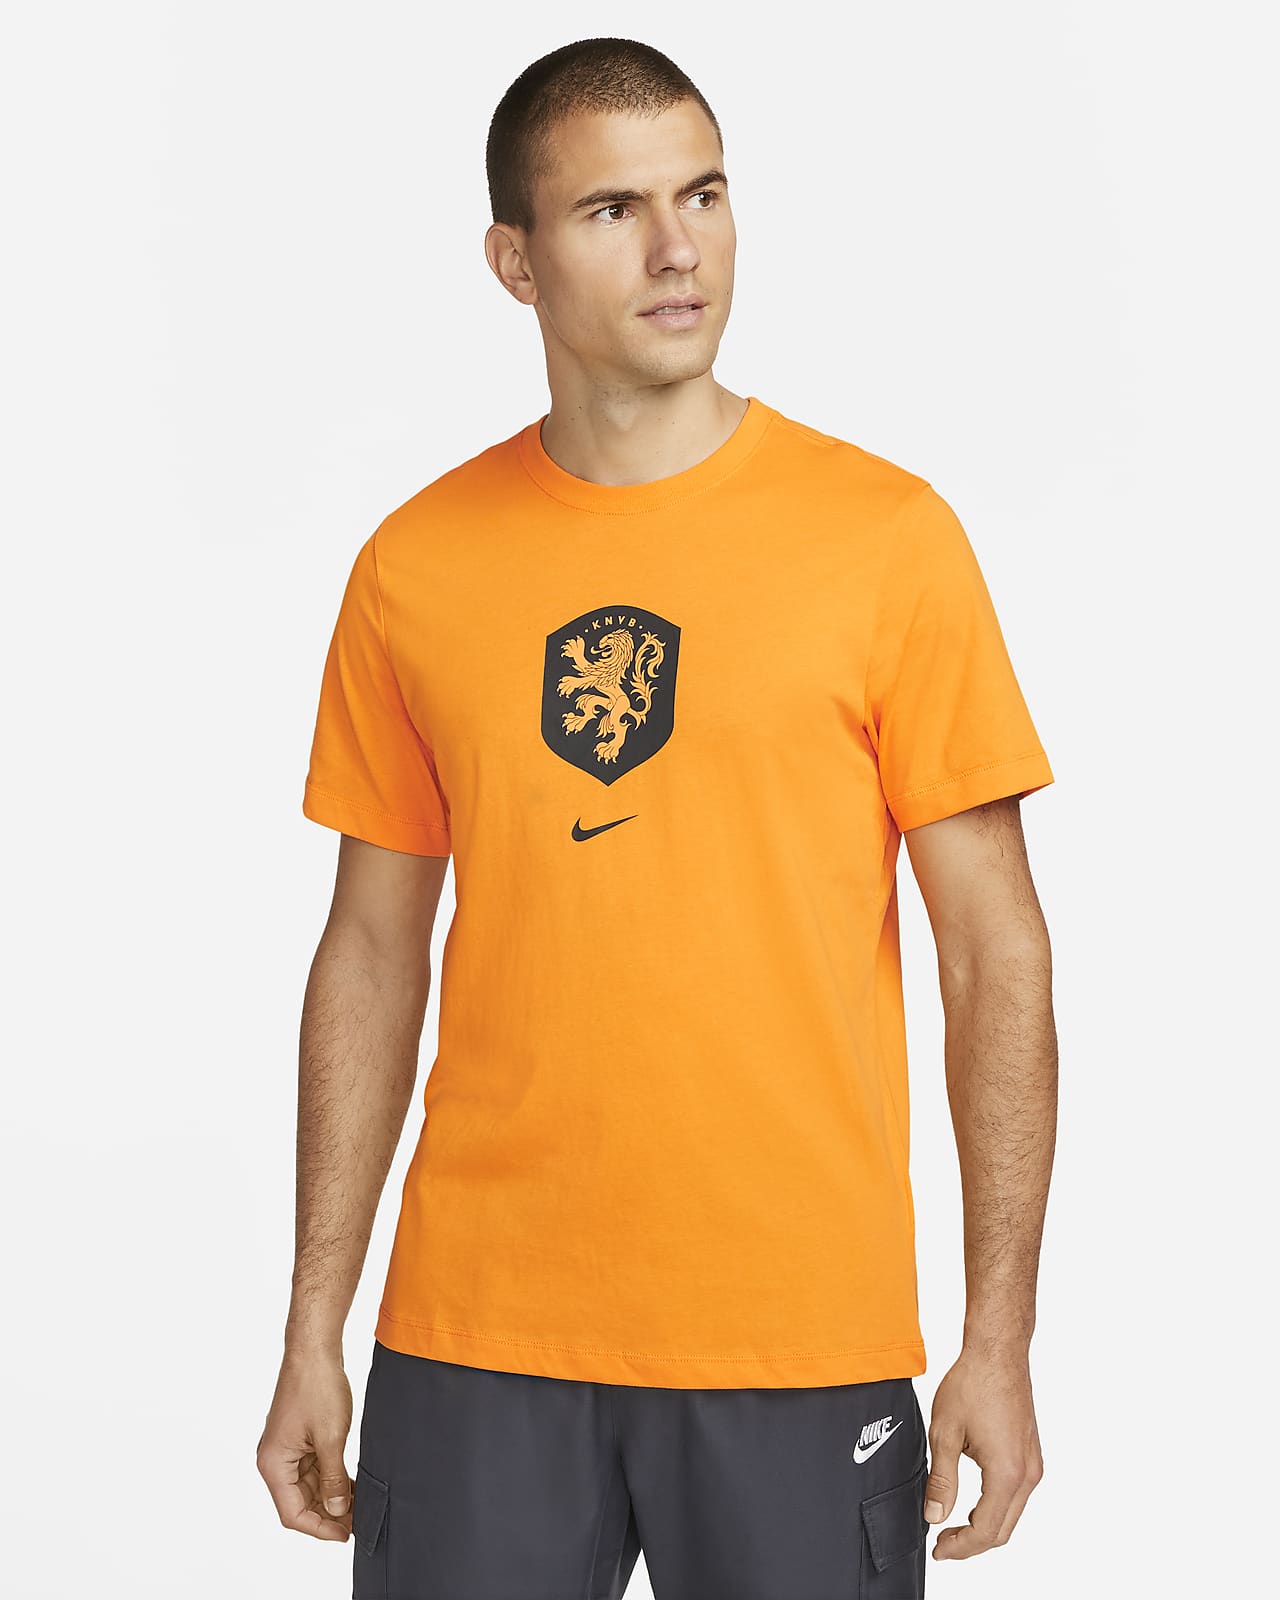 Tee-shirt Nike Pays-Bas pour homme